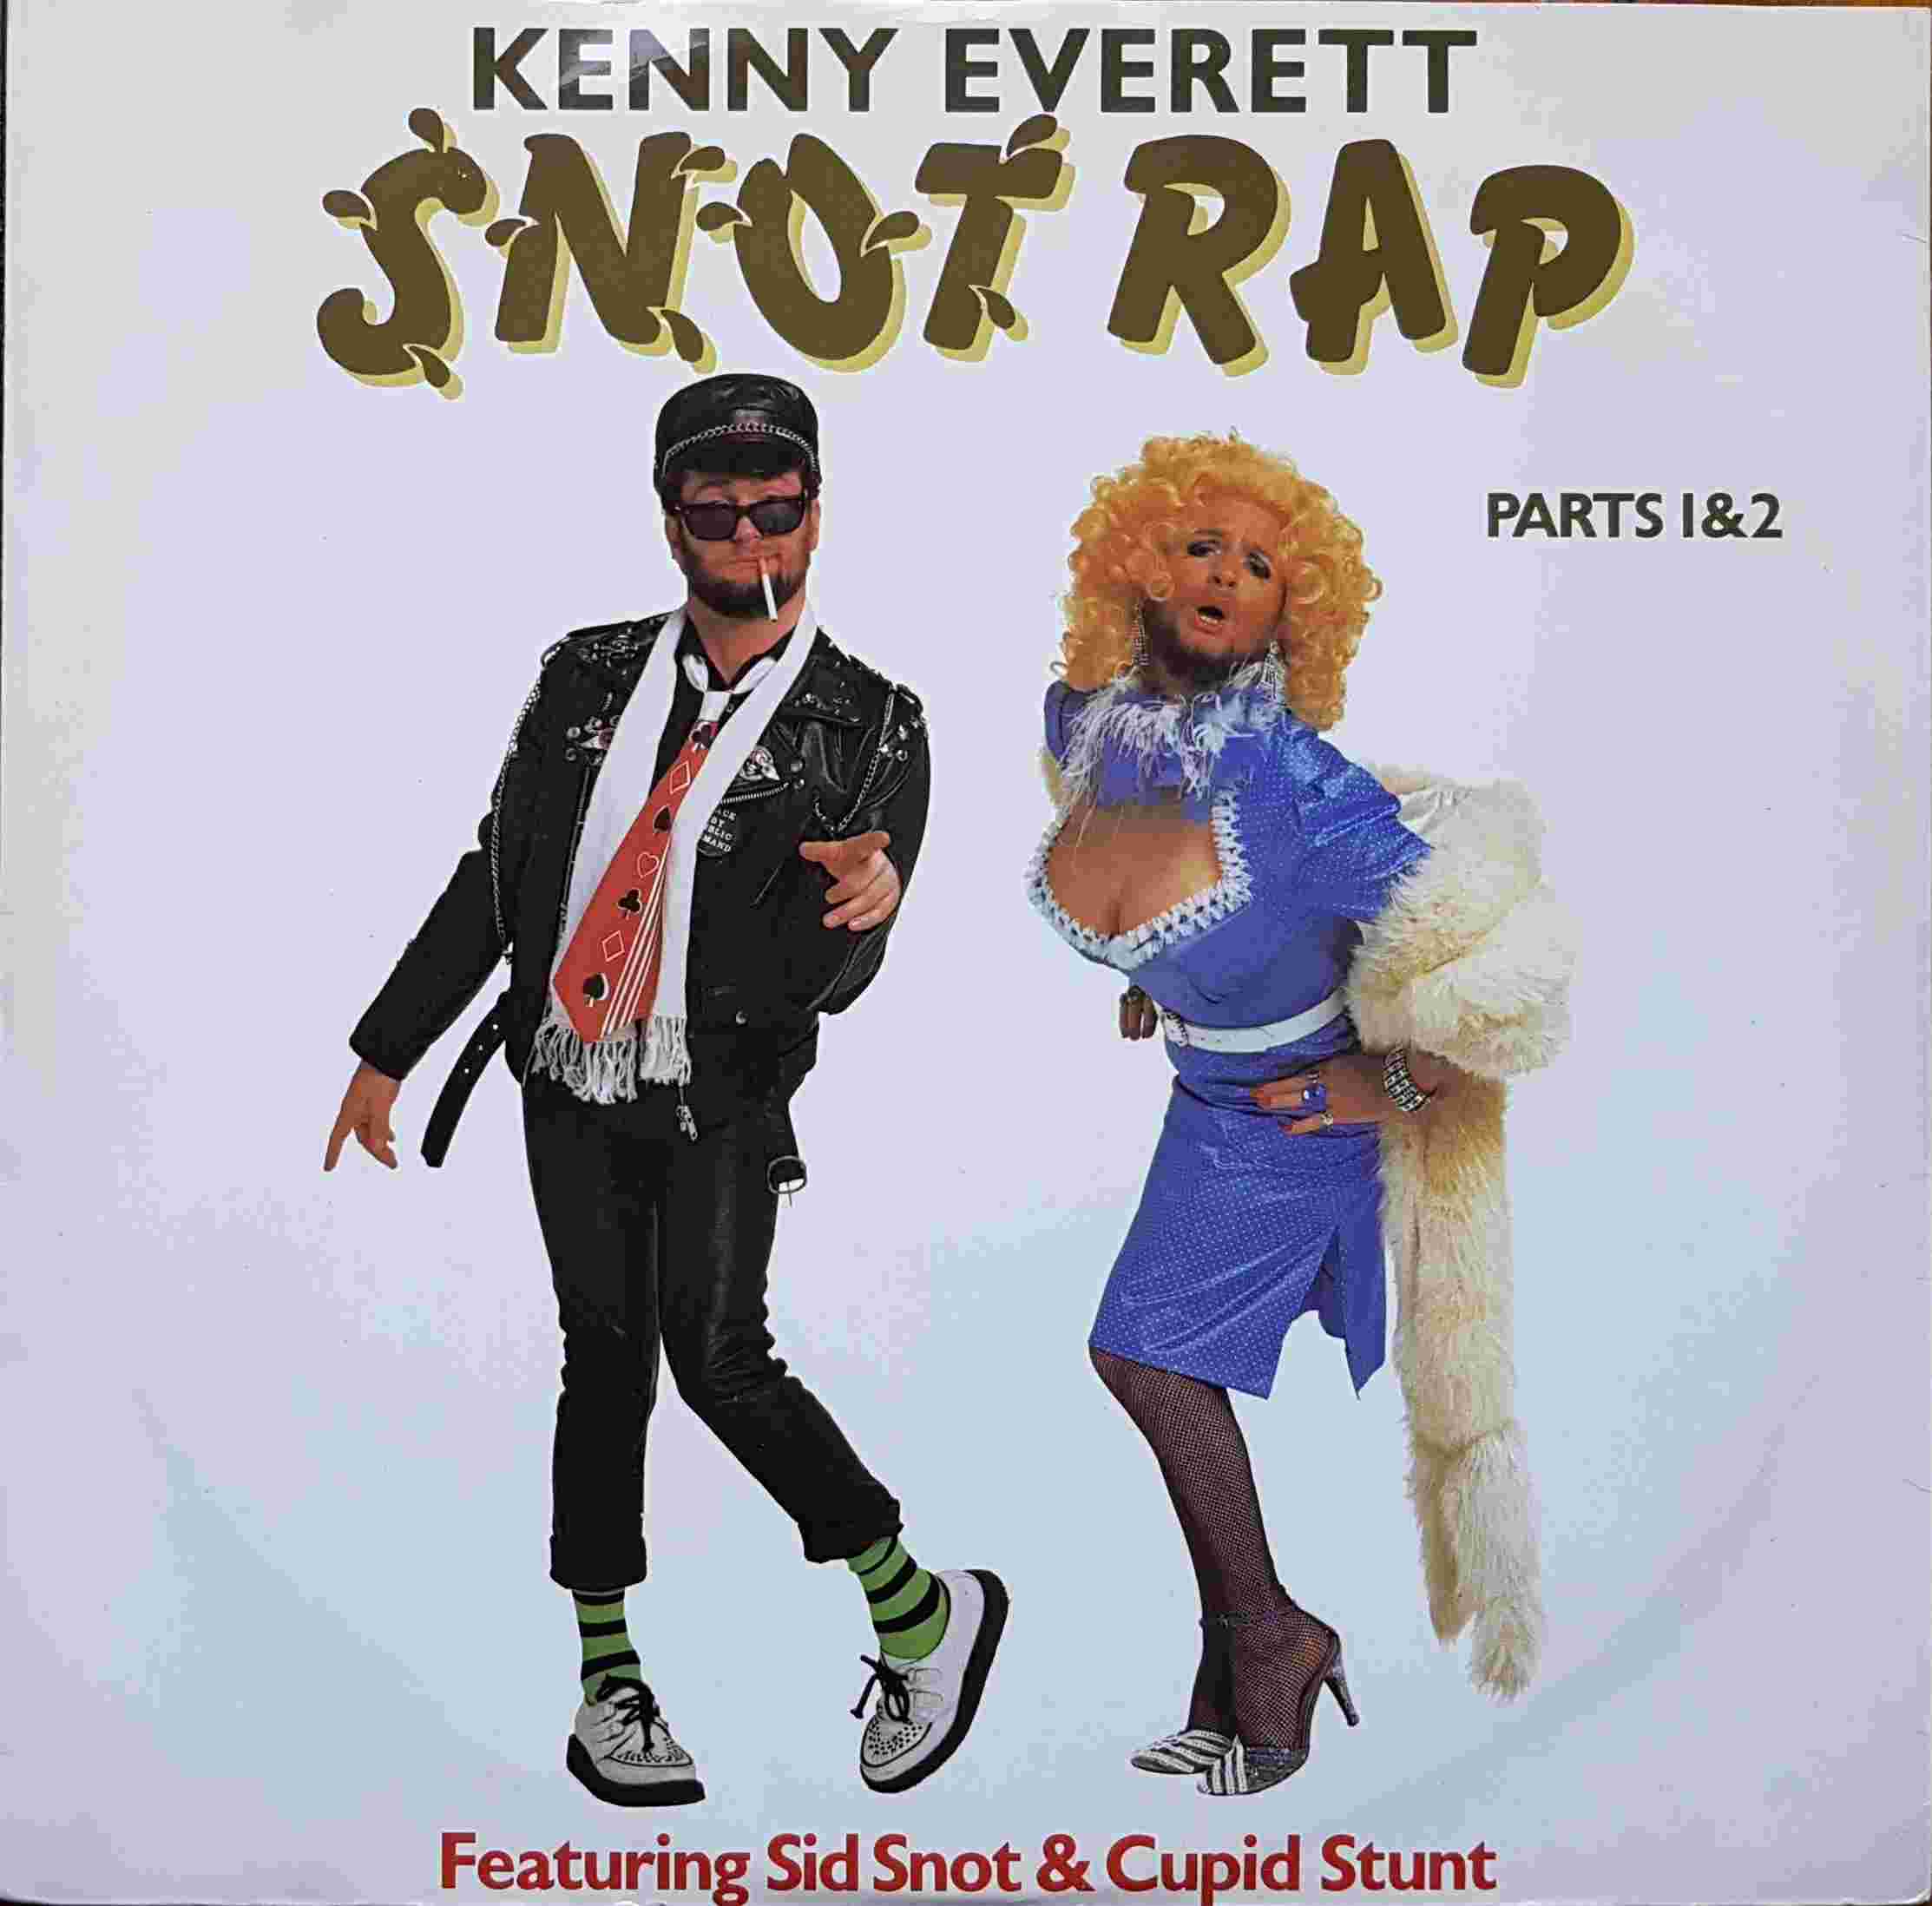 Picture of PC 68054 Snot rap (Kenny Everett television show) by artist Moran / Don / Cameron / Cryer from the BBC 12inches - Records and Tapes library